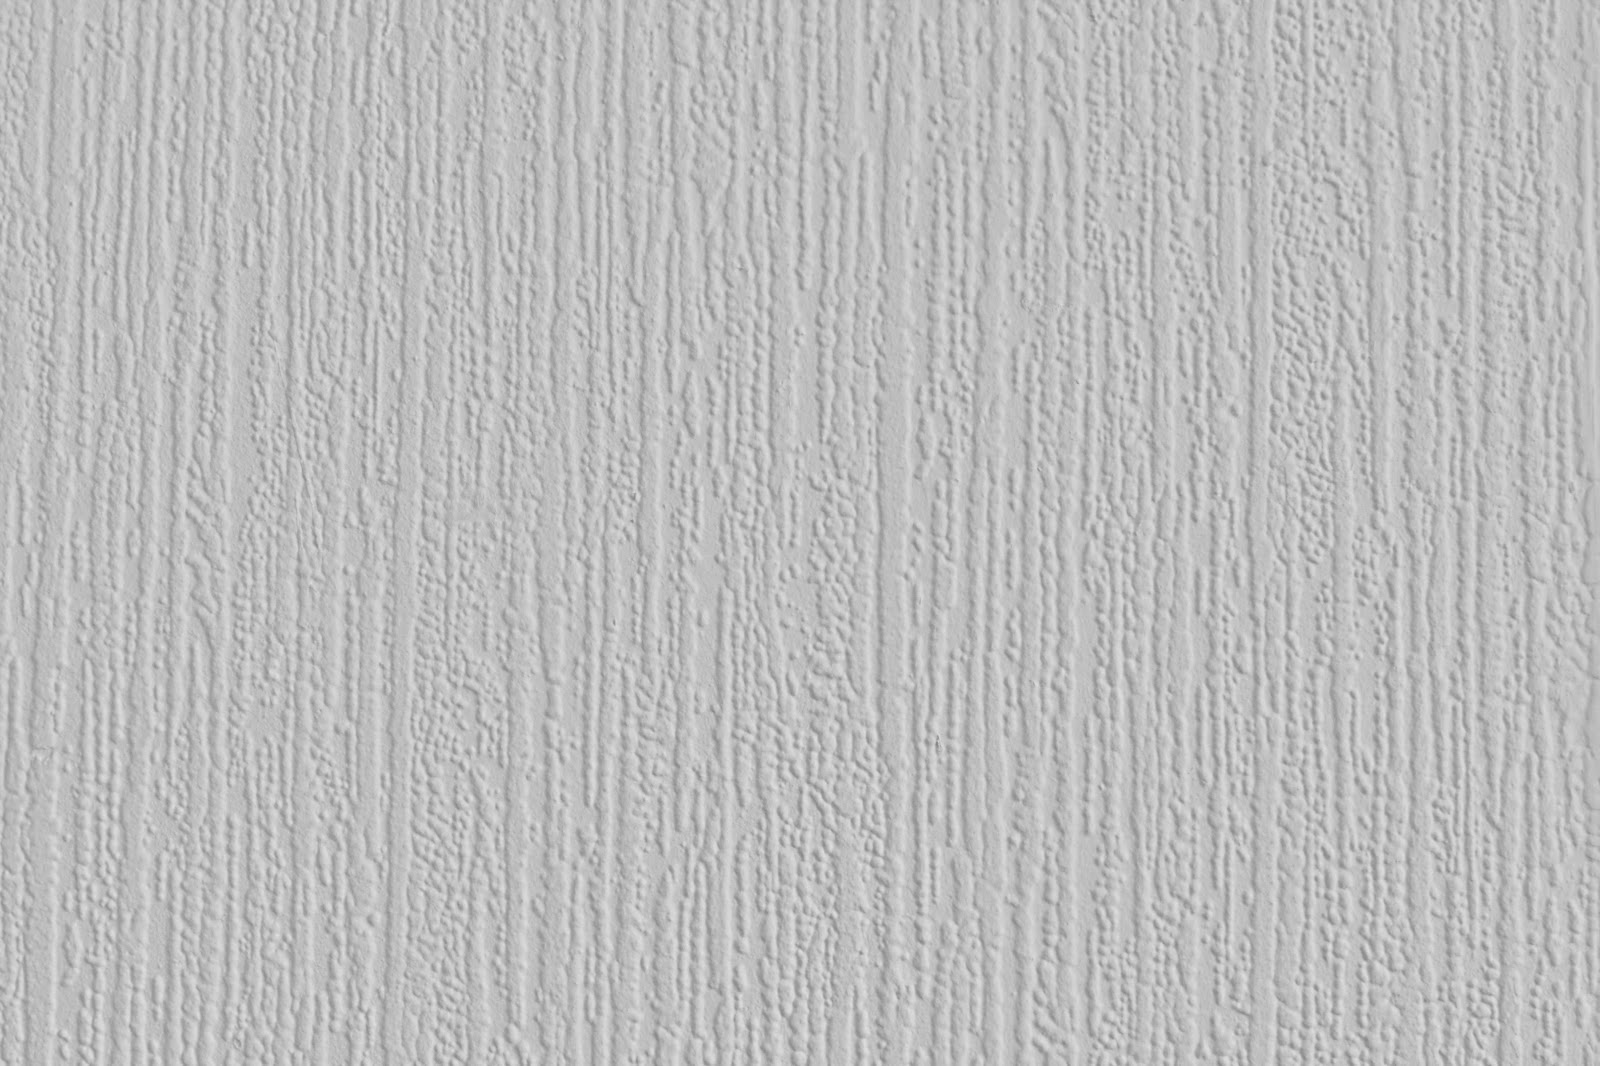 White stucco plaster wall paper texture 3